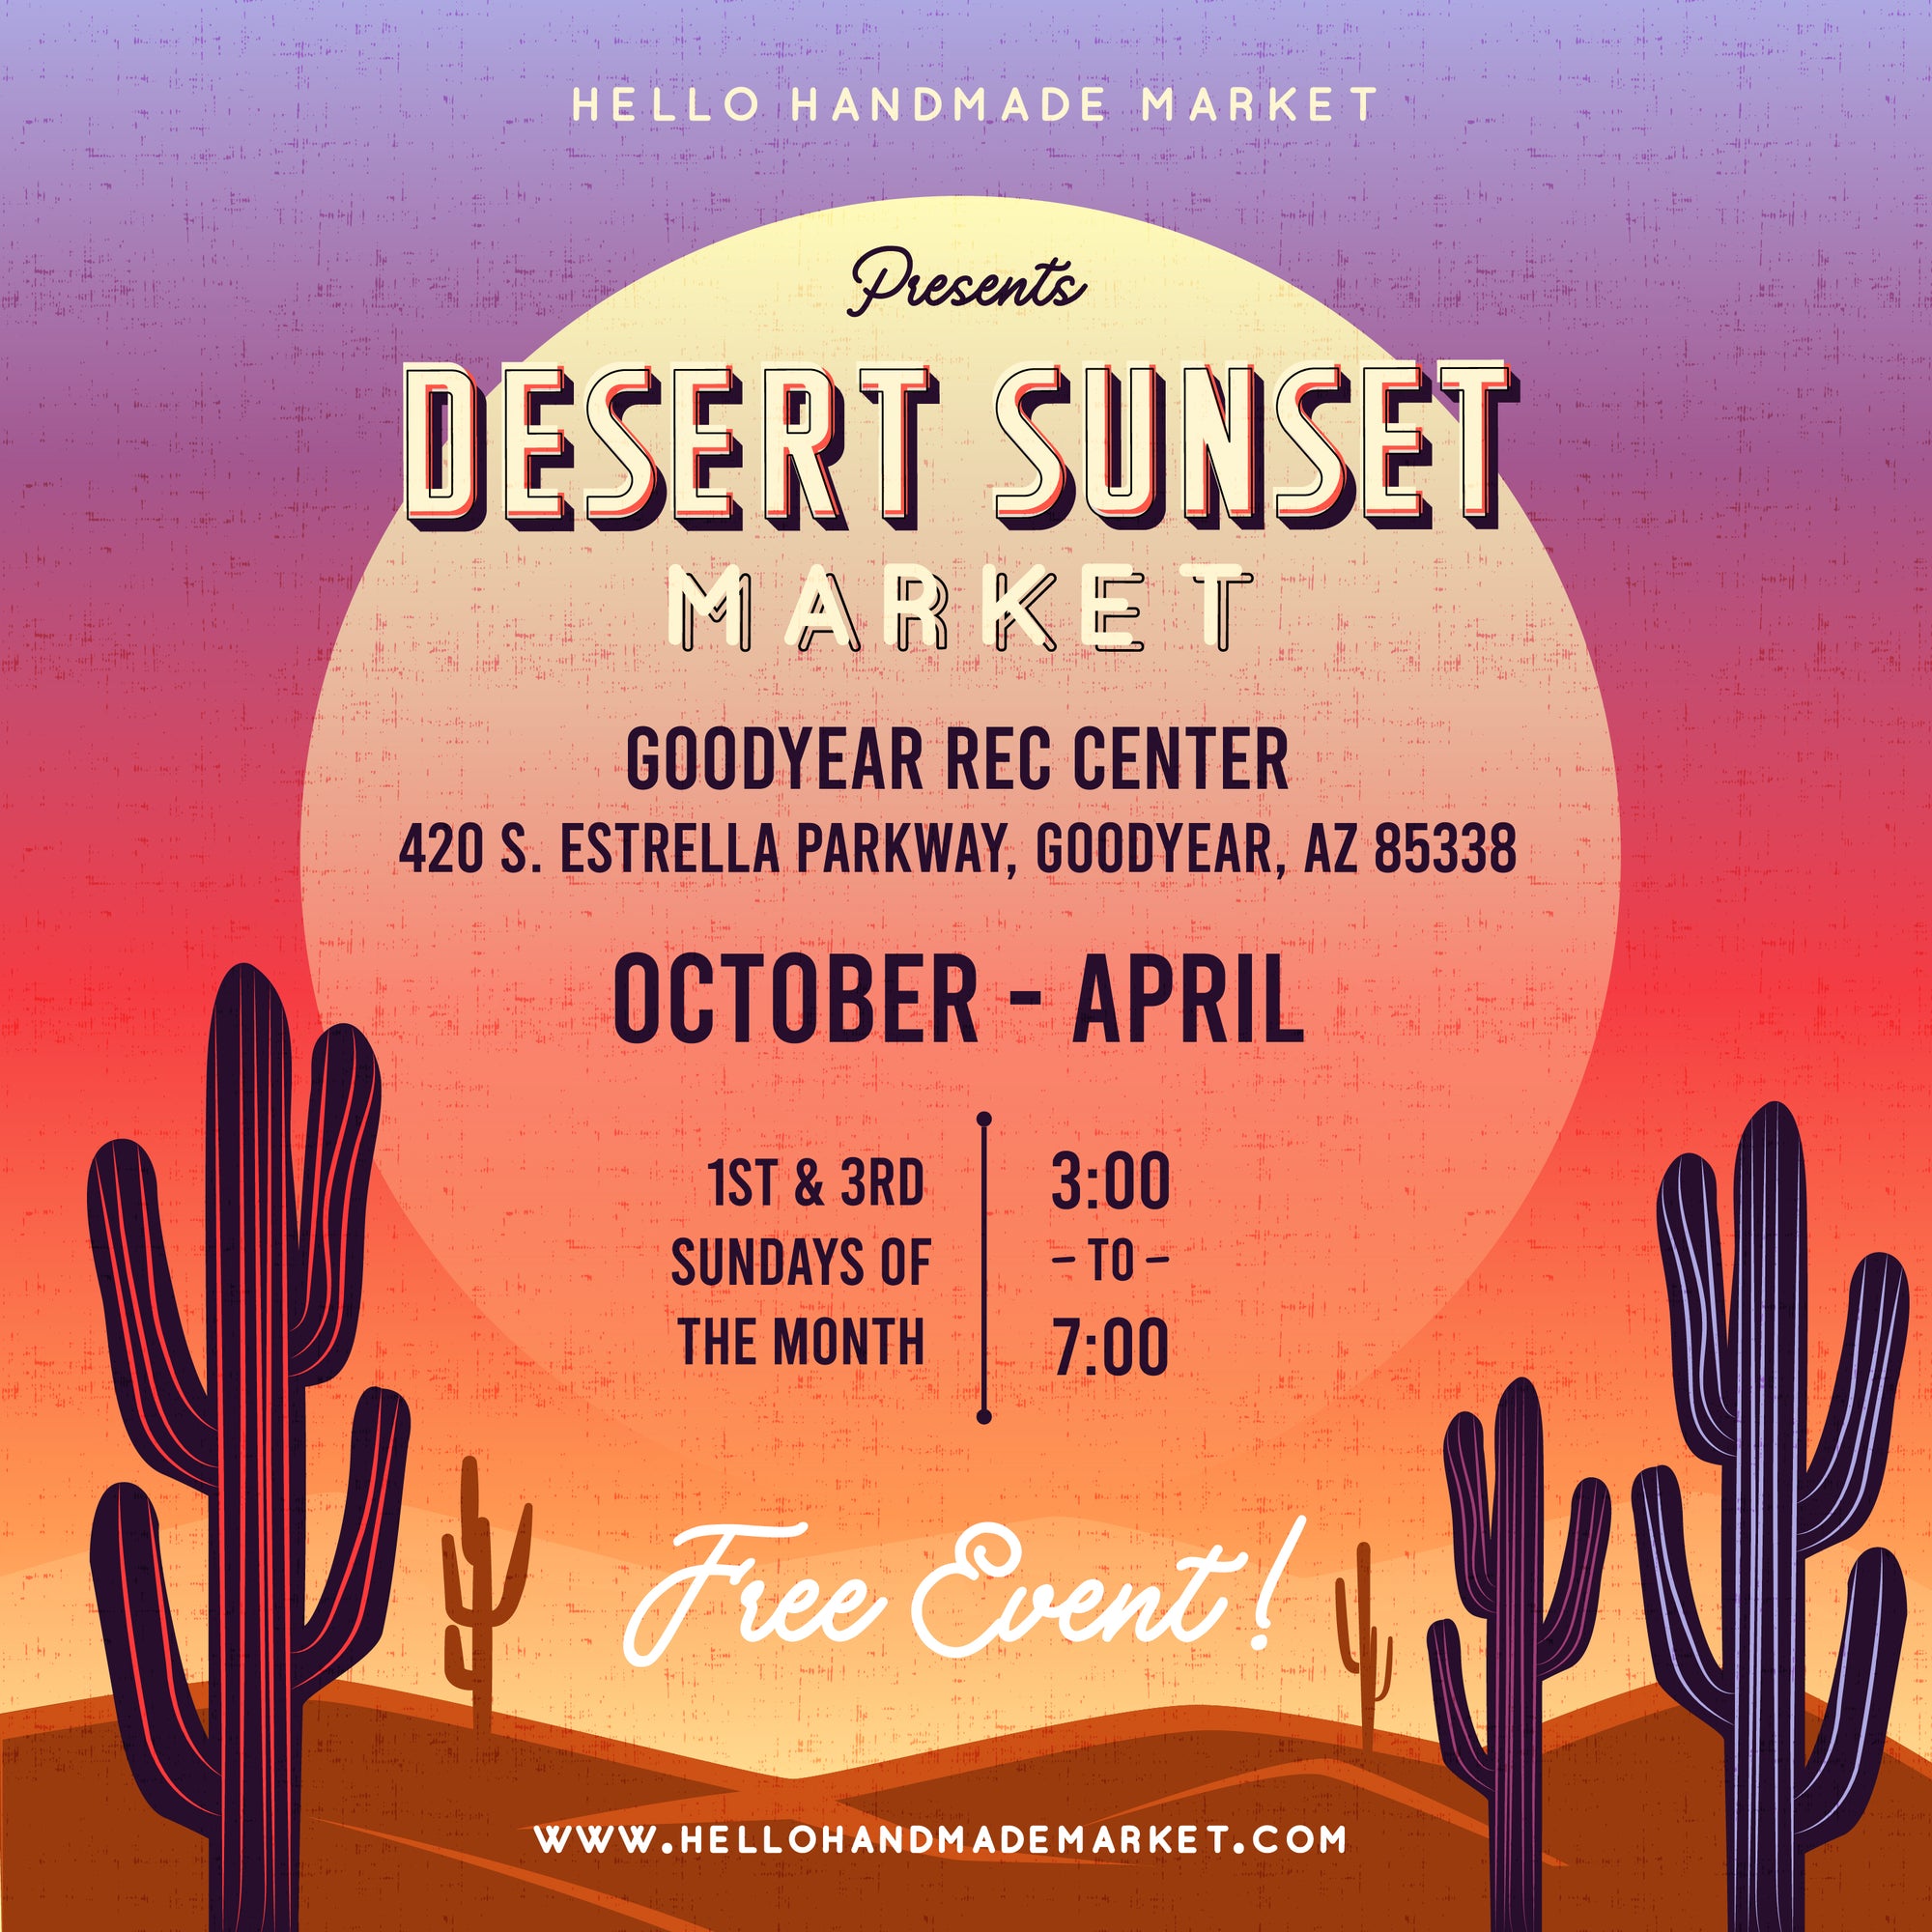 Be a Vendor at Our Desert Sunset Market at the Goodyear Rec Center